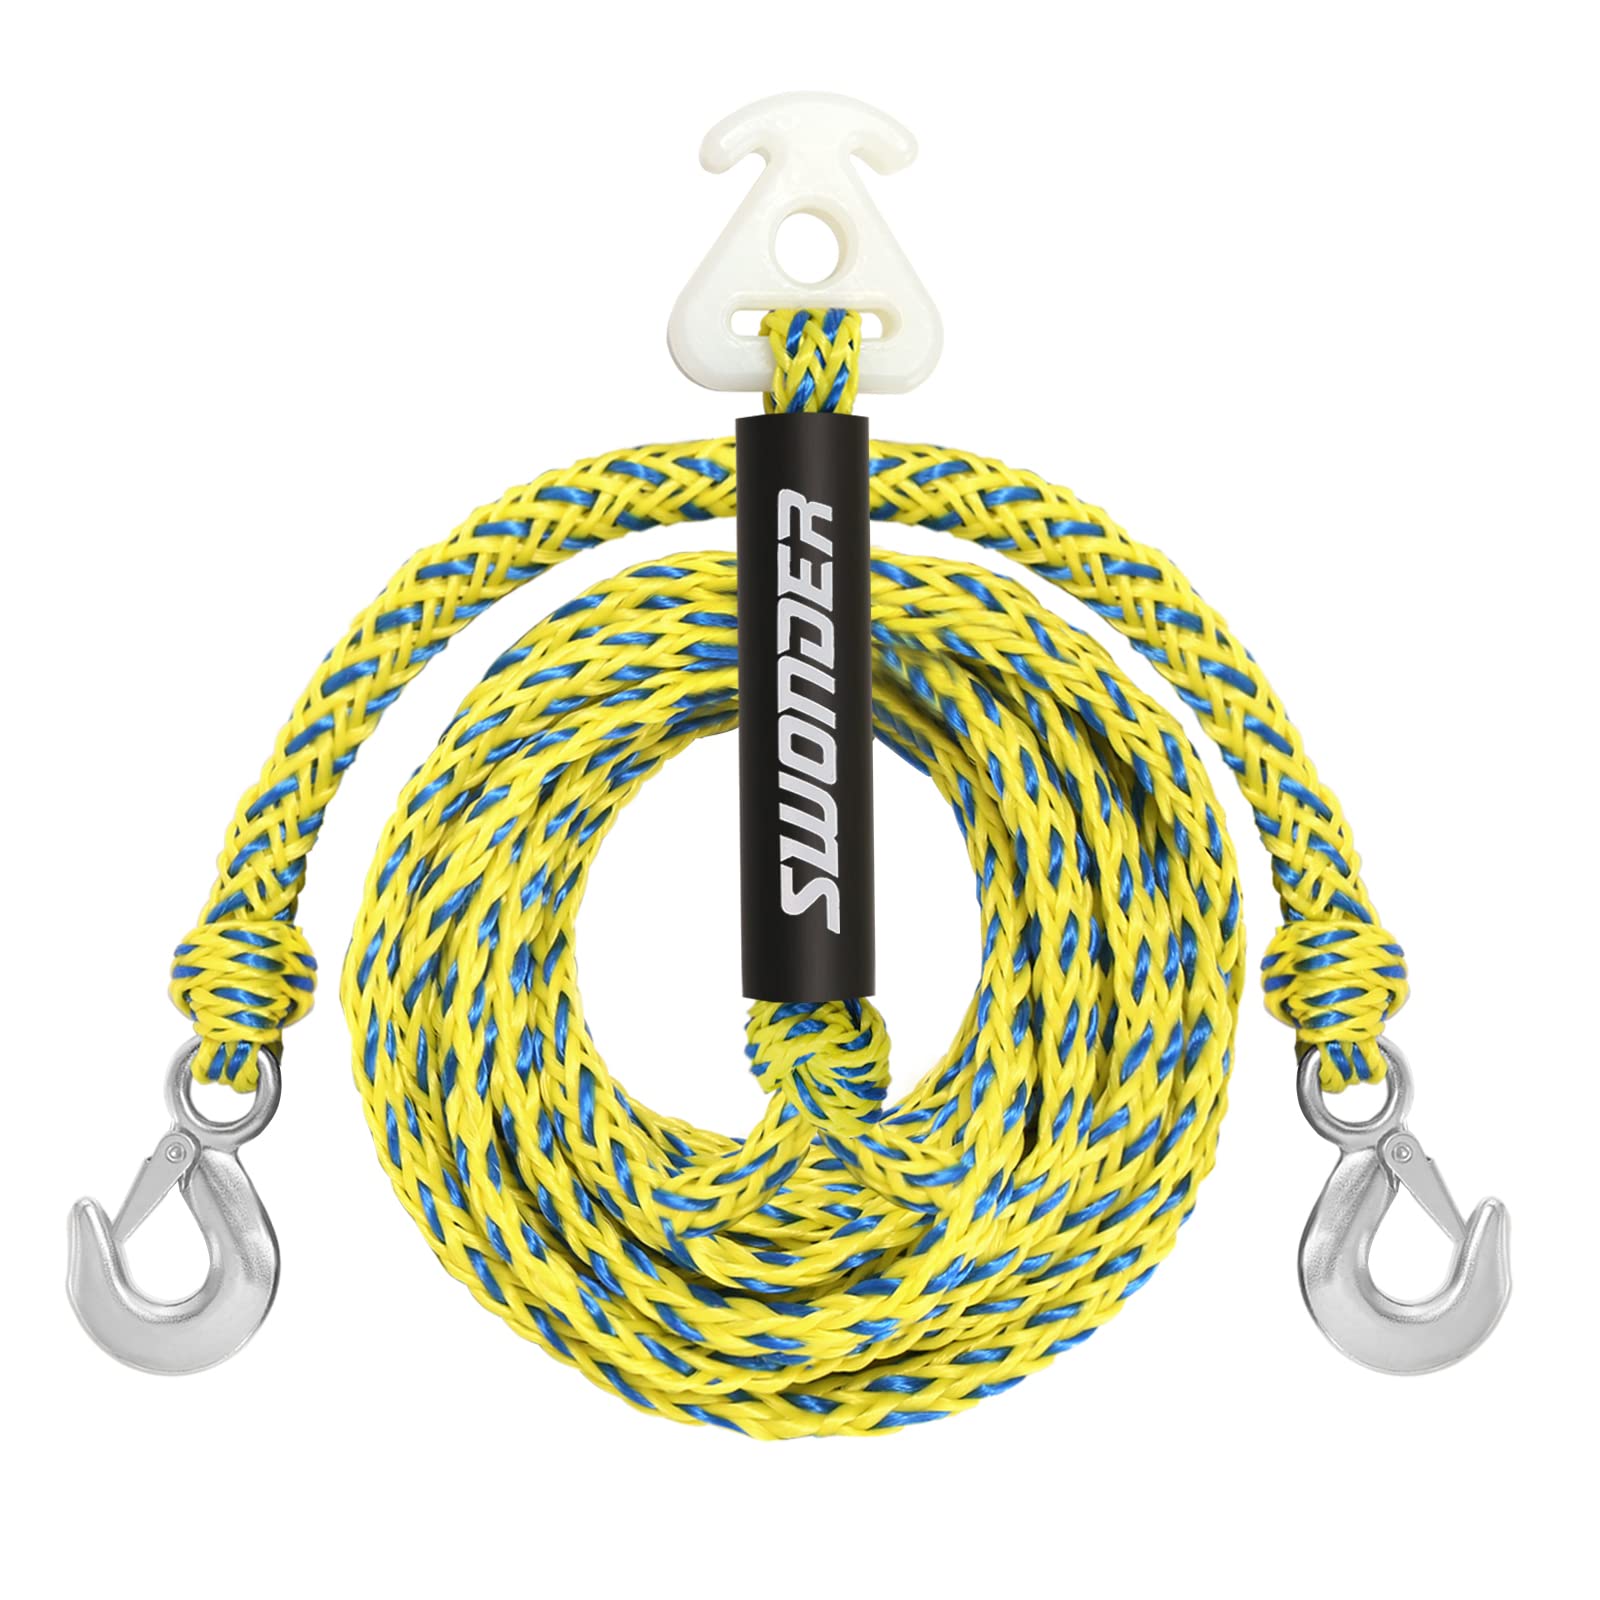 Boat Tube Towable Rope Quick Connector,Tow Rope for Tubing, Ski Rope for  Water Skiing, Towable Tubes for Boating, Wakeboard Rope, Jet Ski,  Watersports